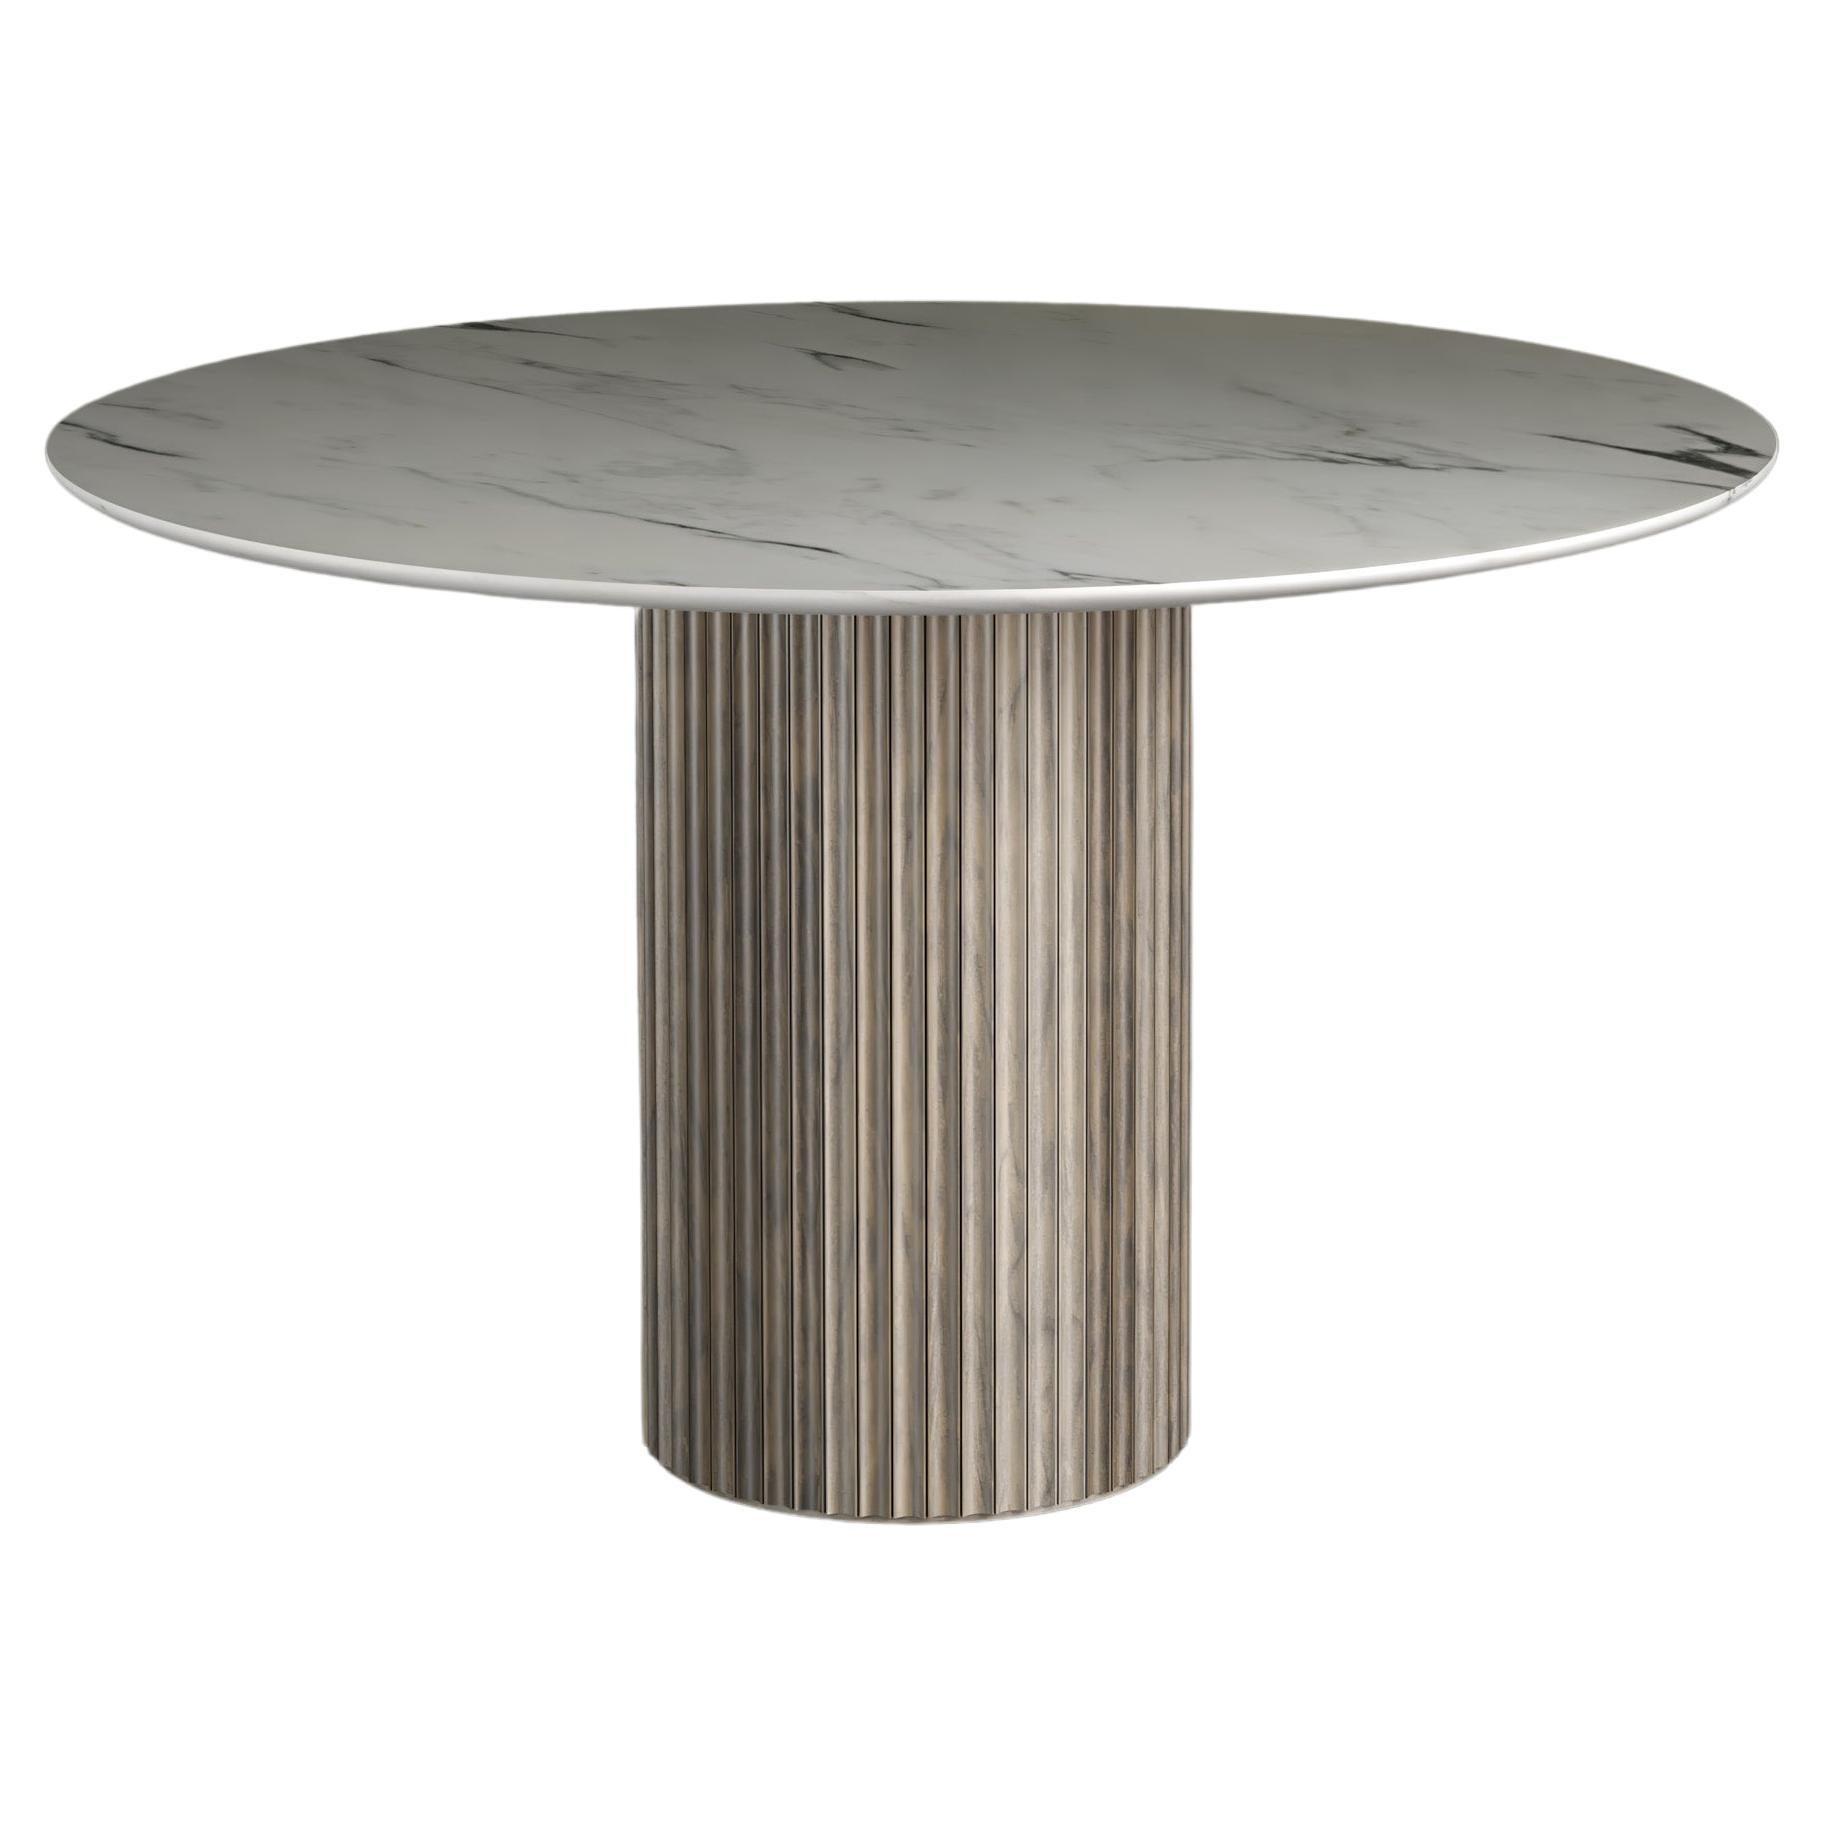 PILAR Round Center/ Dining Table/ Oxidized Maple Wood, White Marble Top by INDO- For Sale